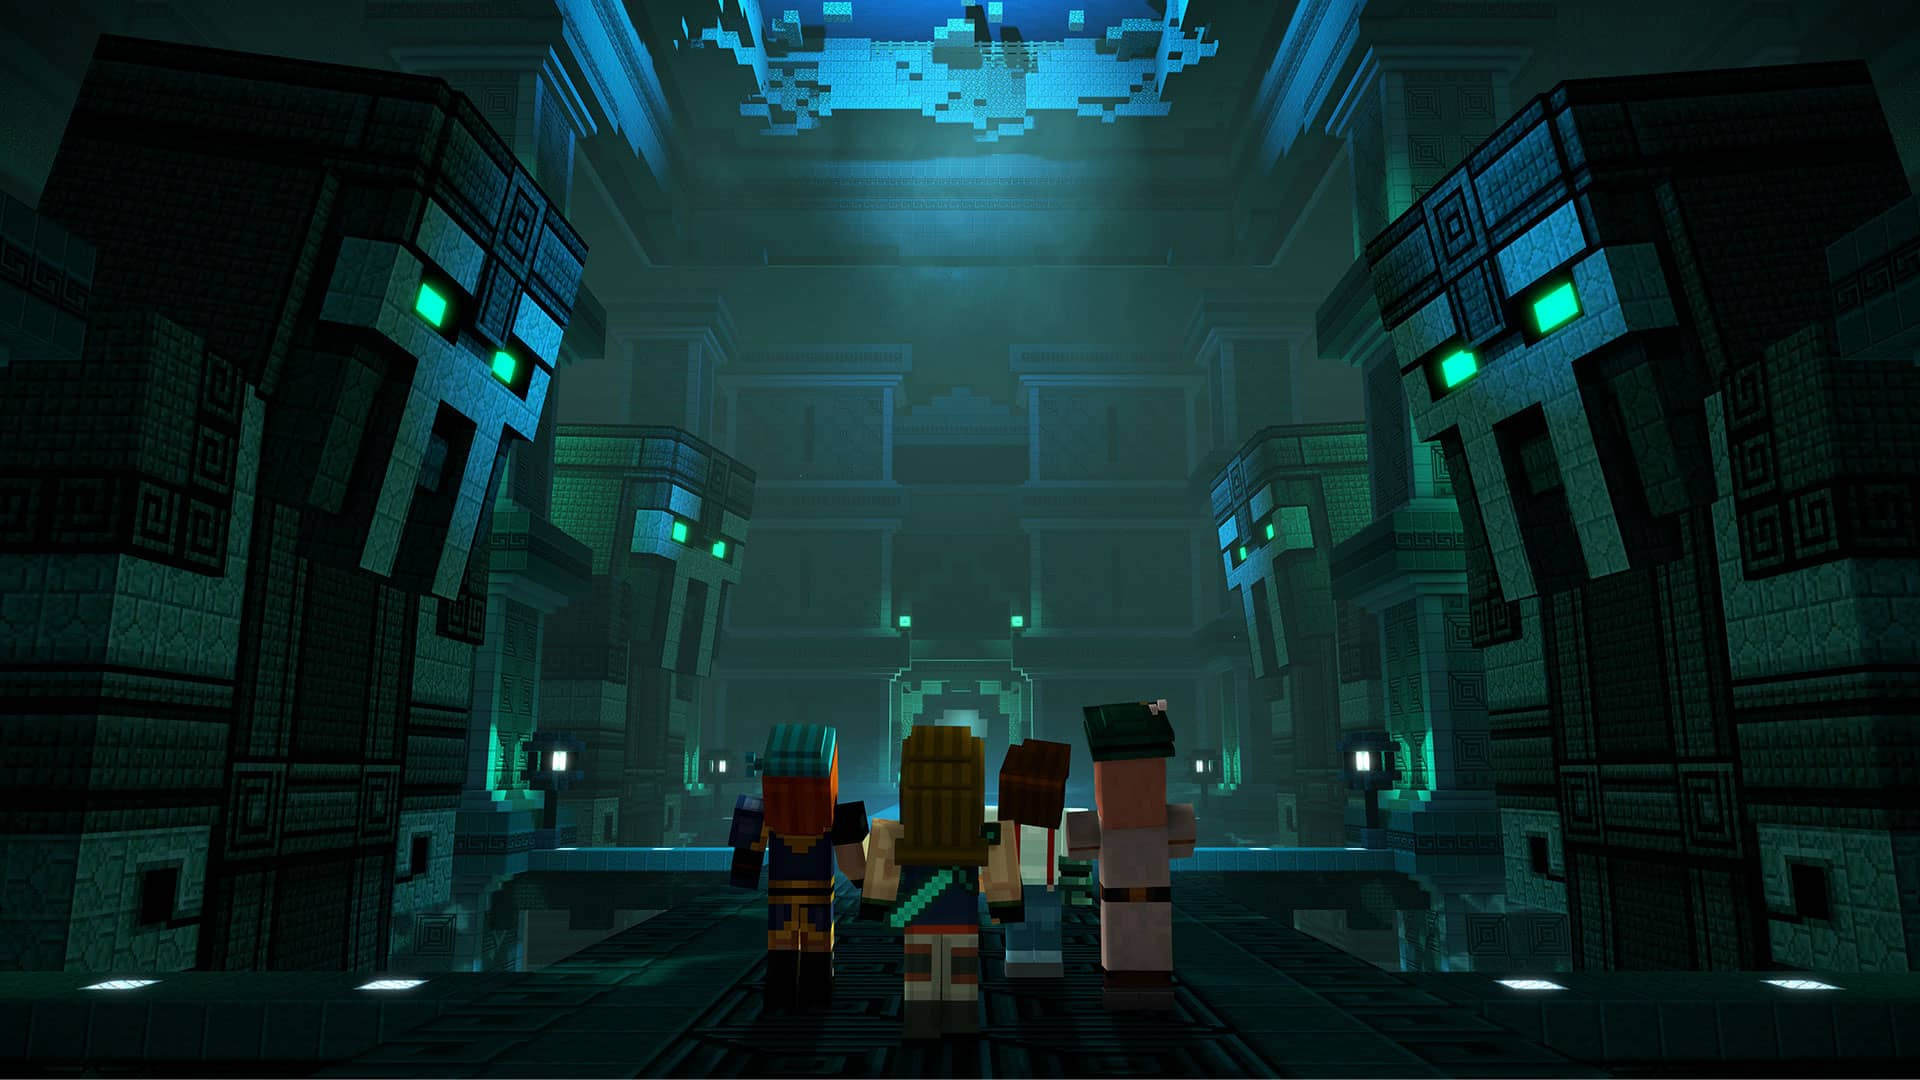 Minecraft: Story Mode challenges the way Telltale Games builds its stories